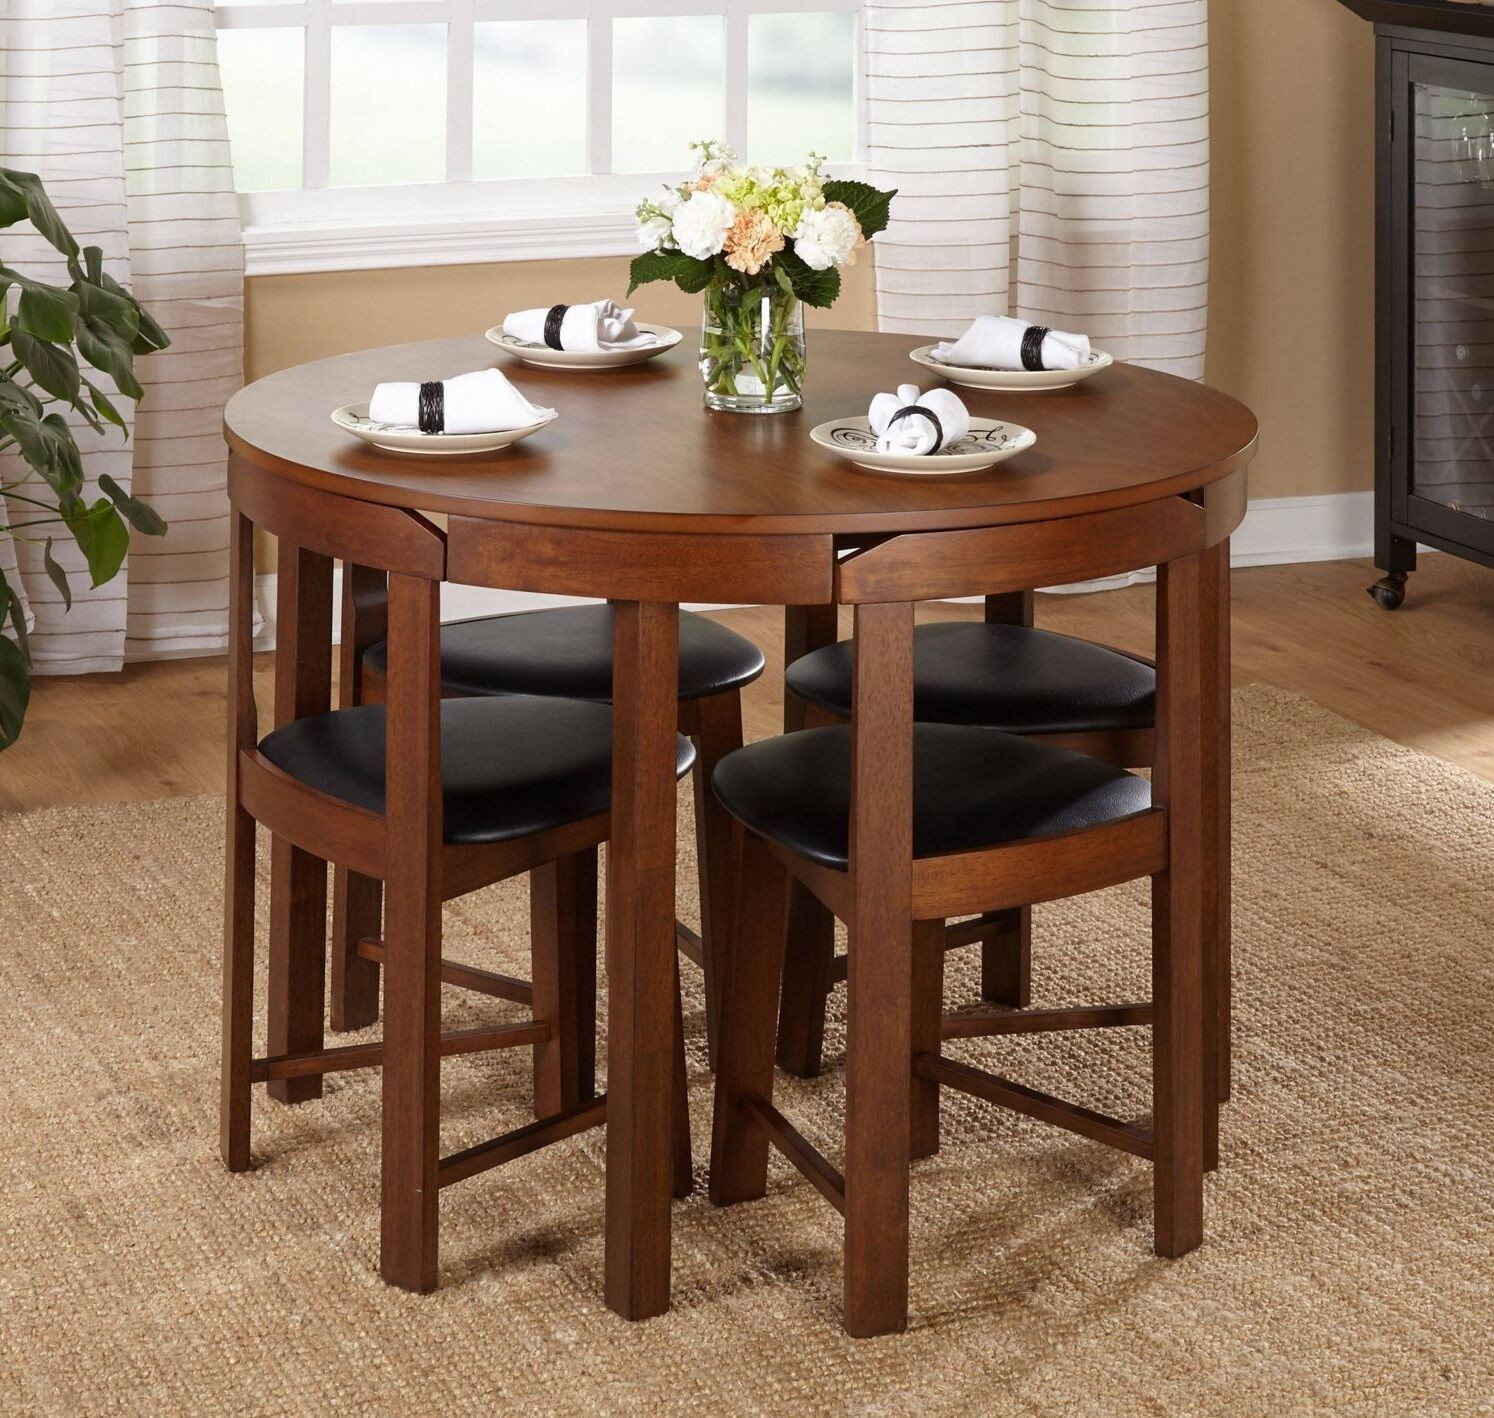 Dinette Set For Small Kitchen
 Modern 5pc Dining Table Set Kitchen Dinette Chairs